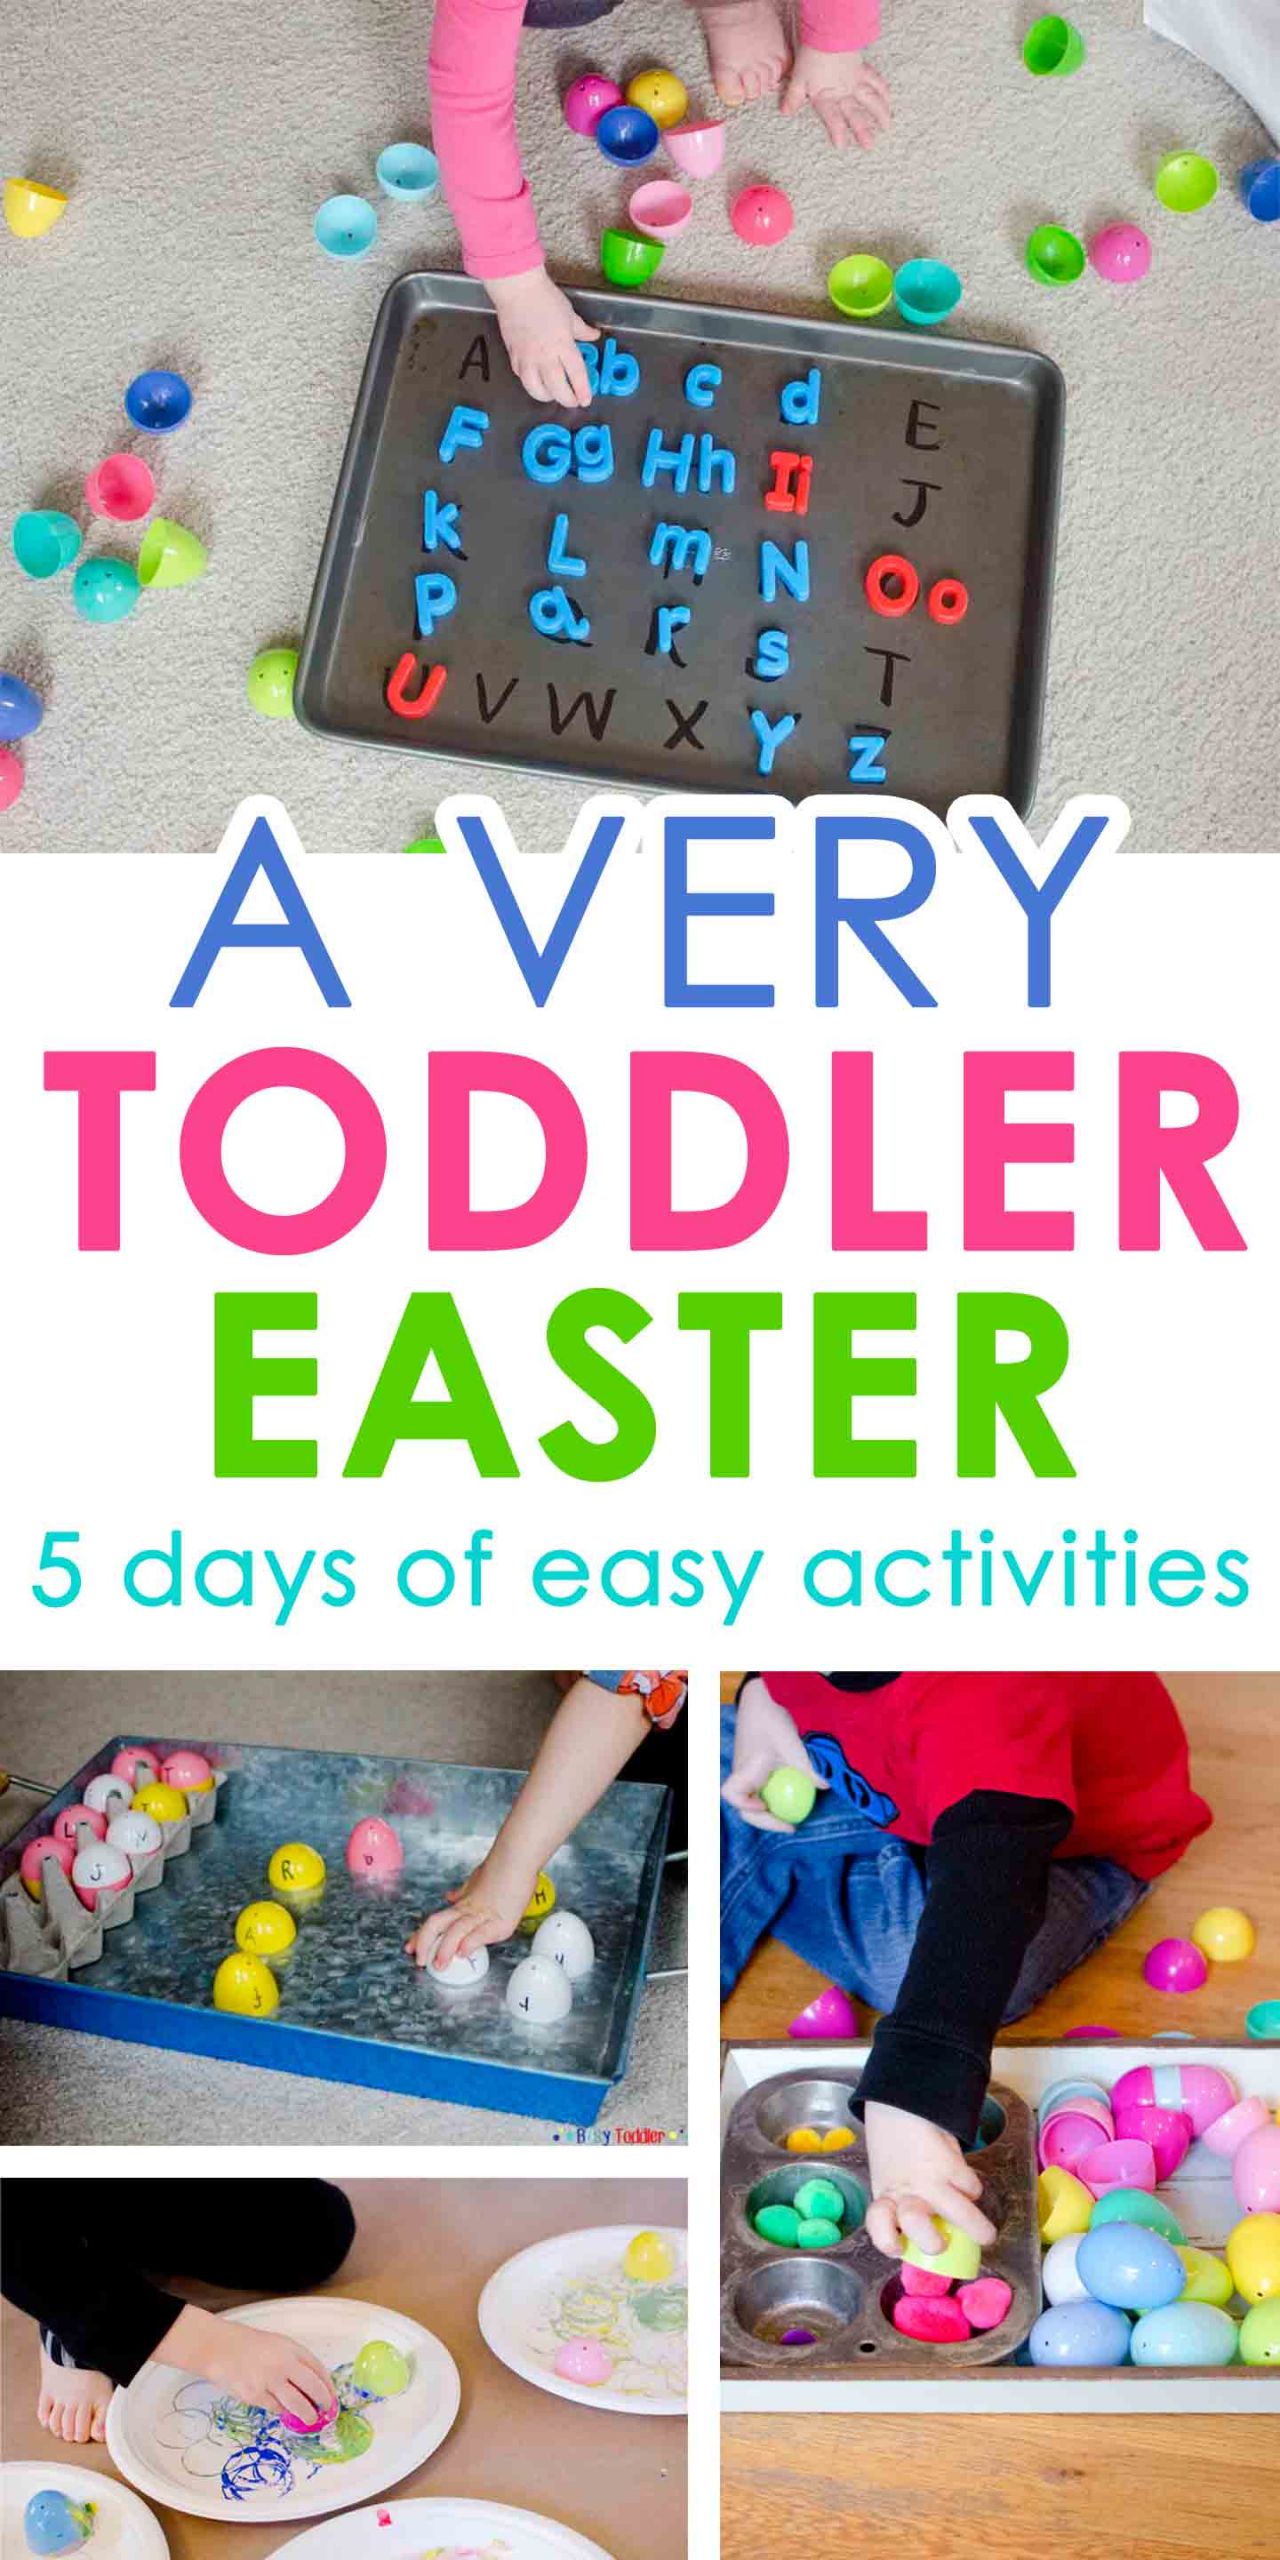 Toddlers Easter Activities
 A Very Toddler Easter Busy Toddler